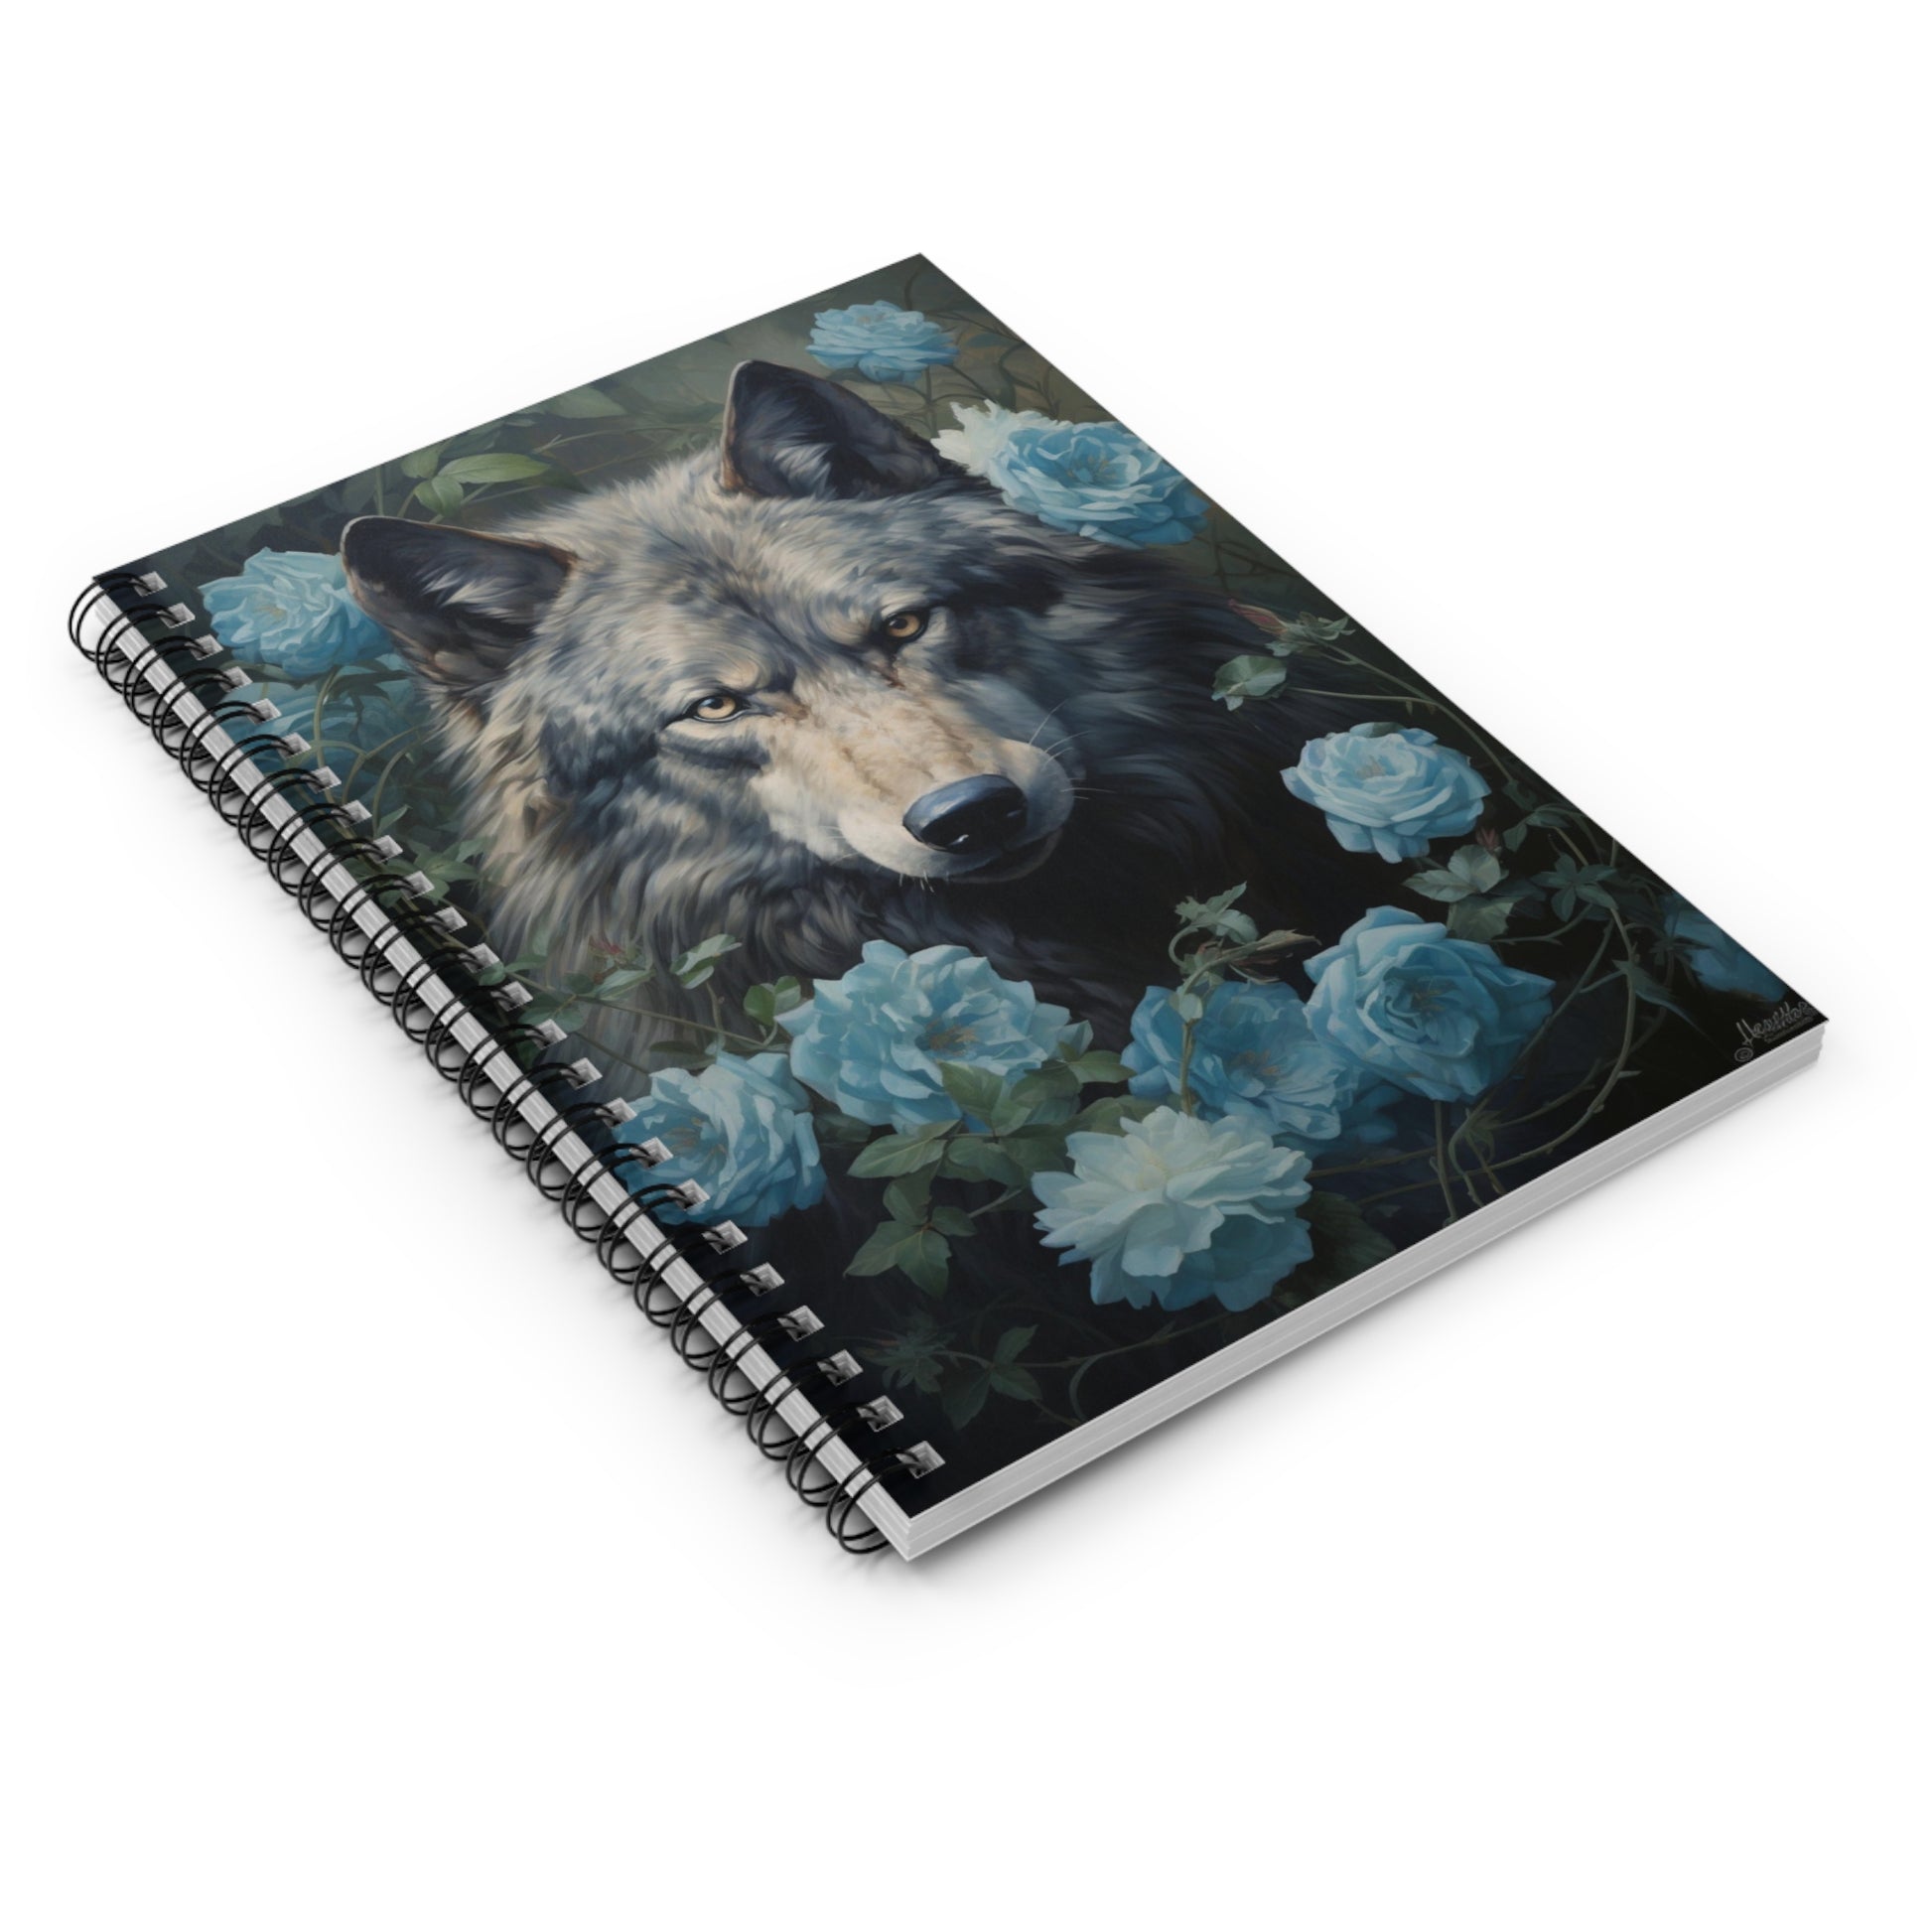 Wolf Blue Roses Spiral Bound Notebook, Goth Travel Pattern Design Small Journal Notepad Ruled Line Book Paper Pad Work Aesthetic Starcove Fashion